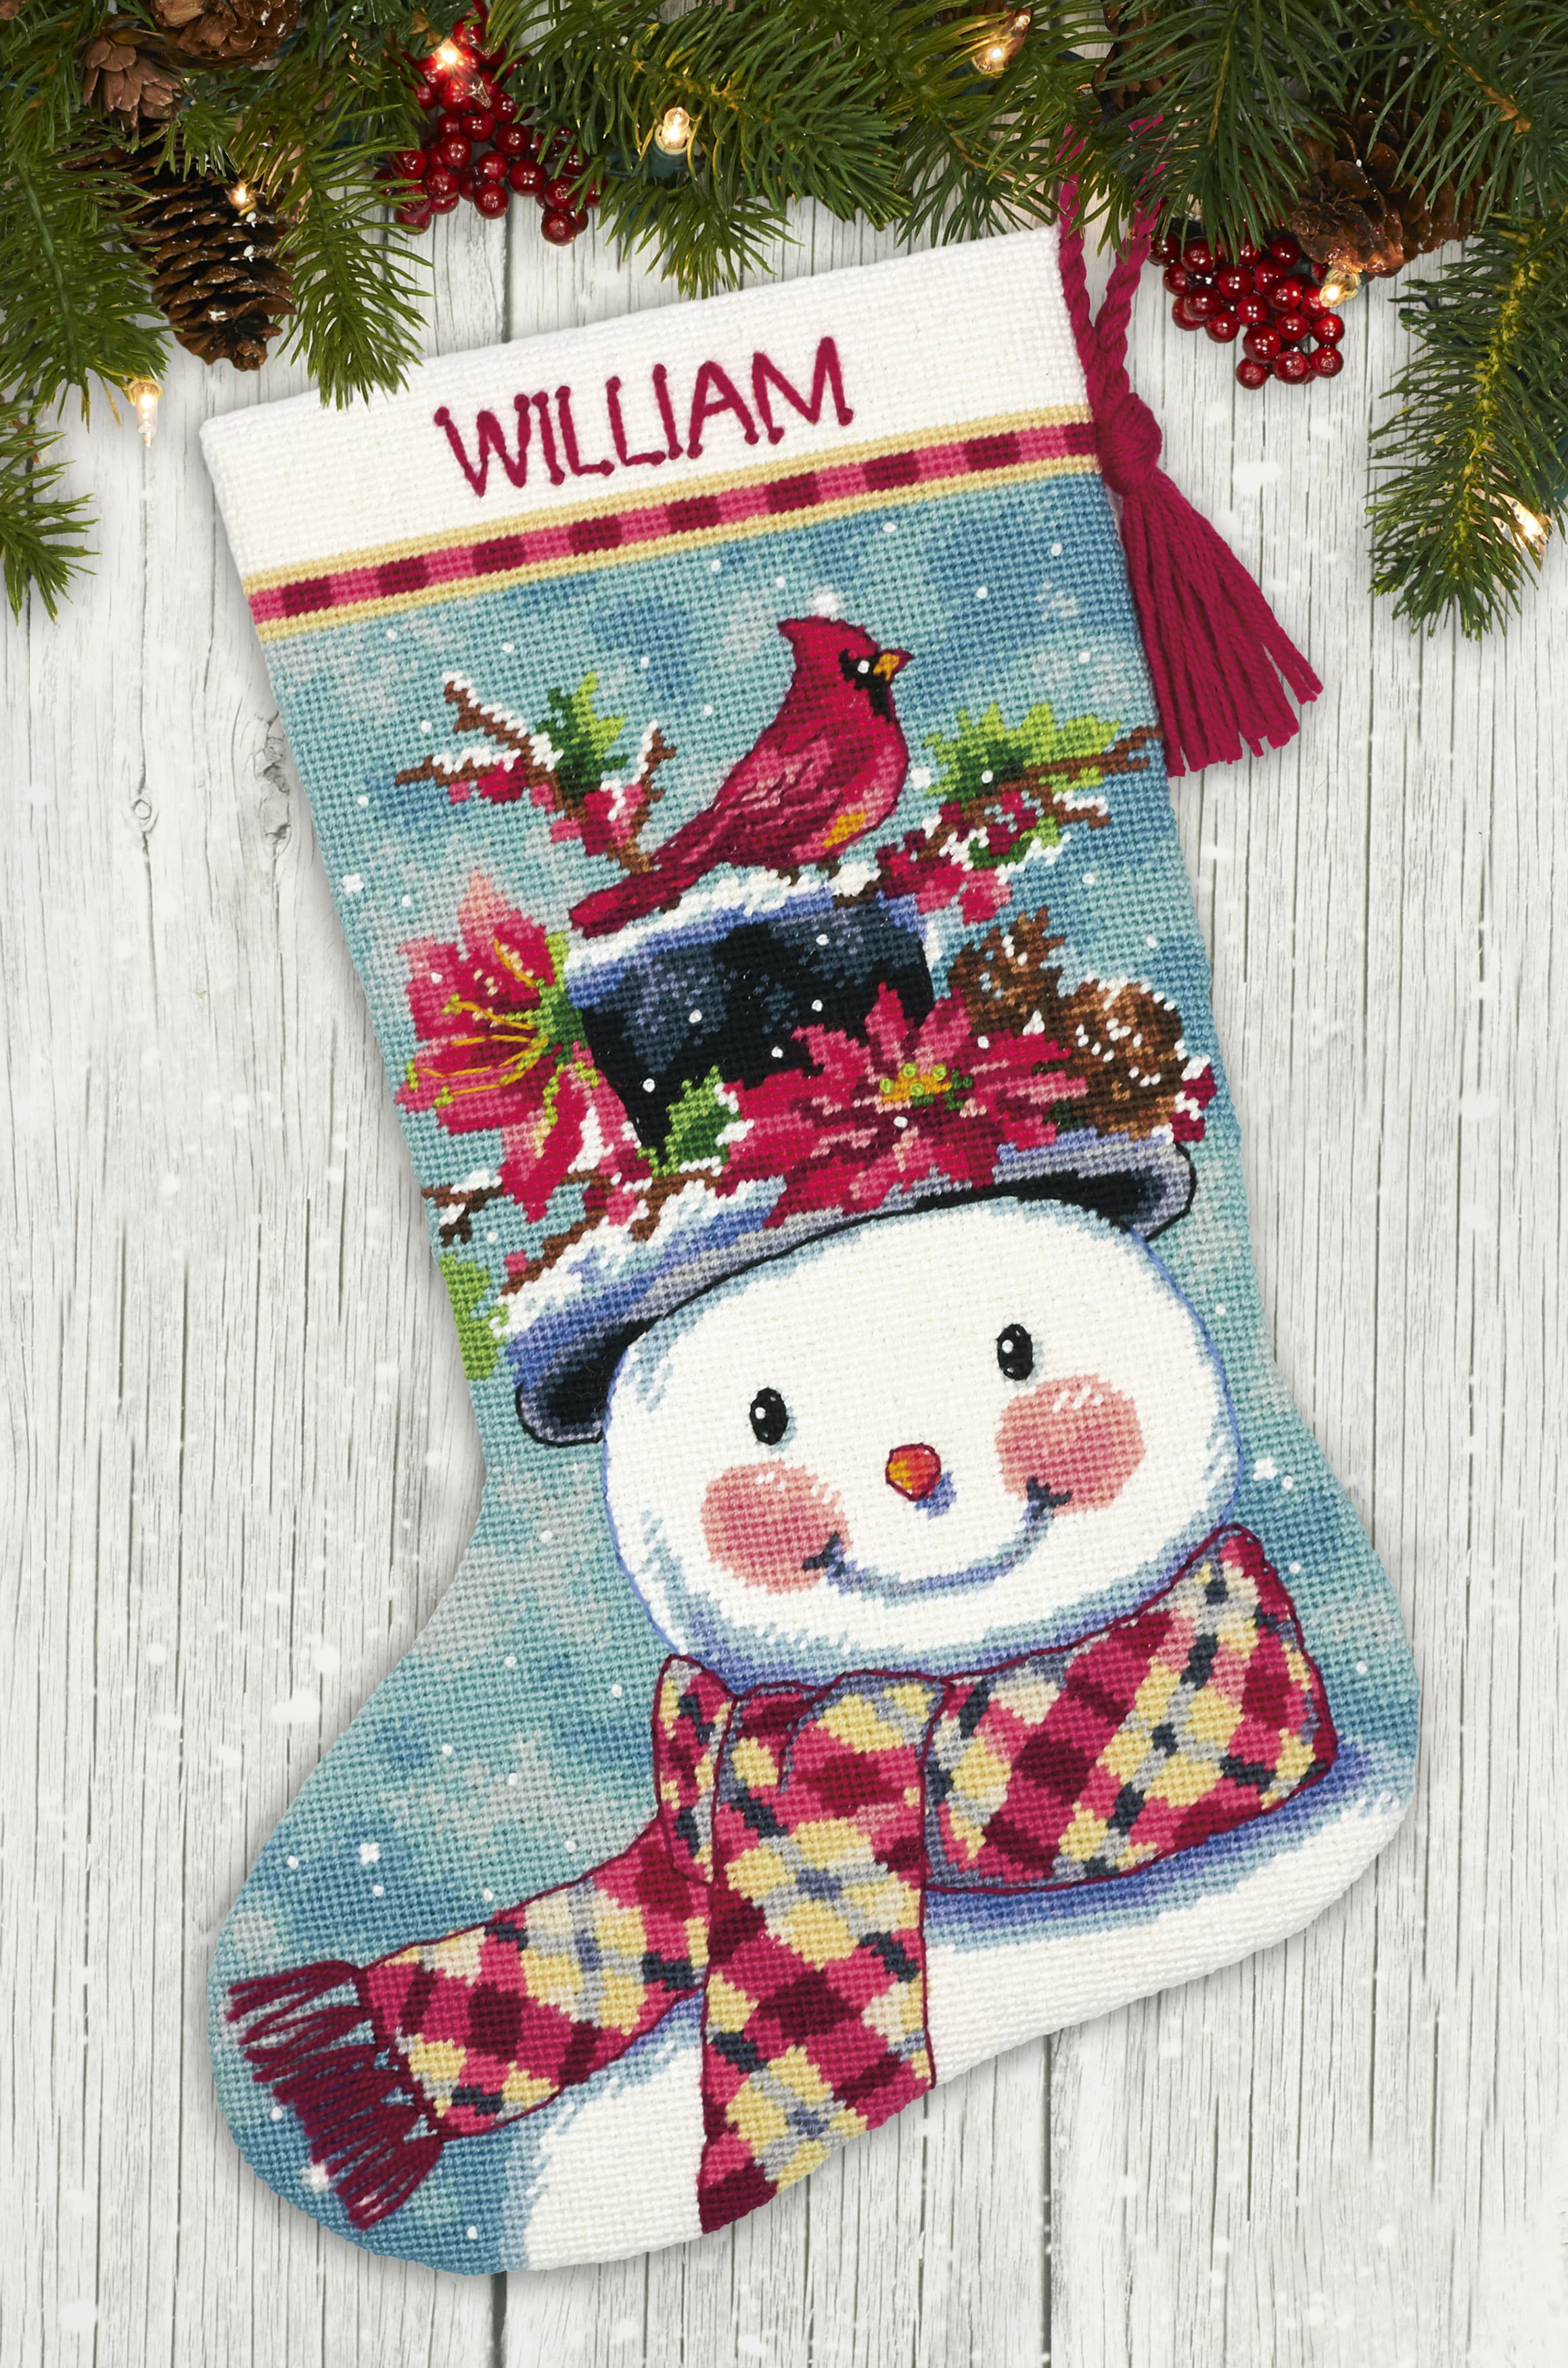 Dimensions Needlepoint Kit 14X14-Patterned Santa Stitched In Yarn 